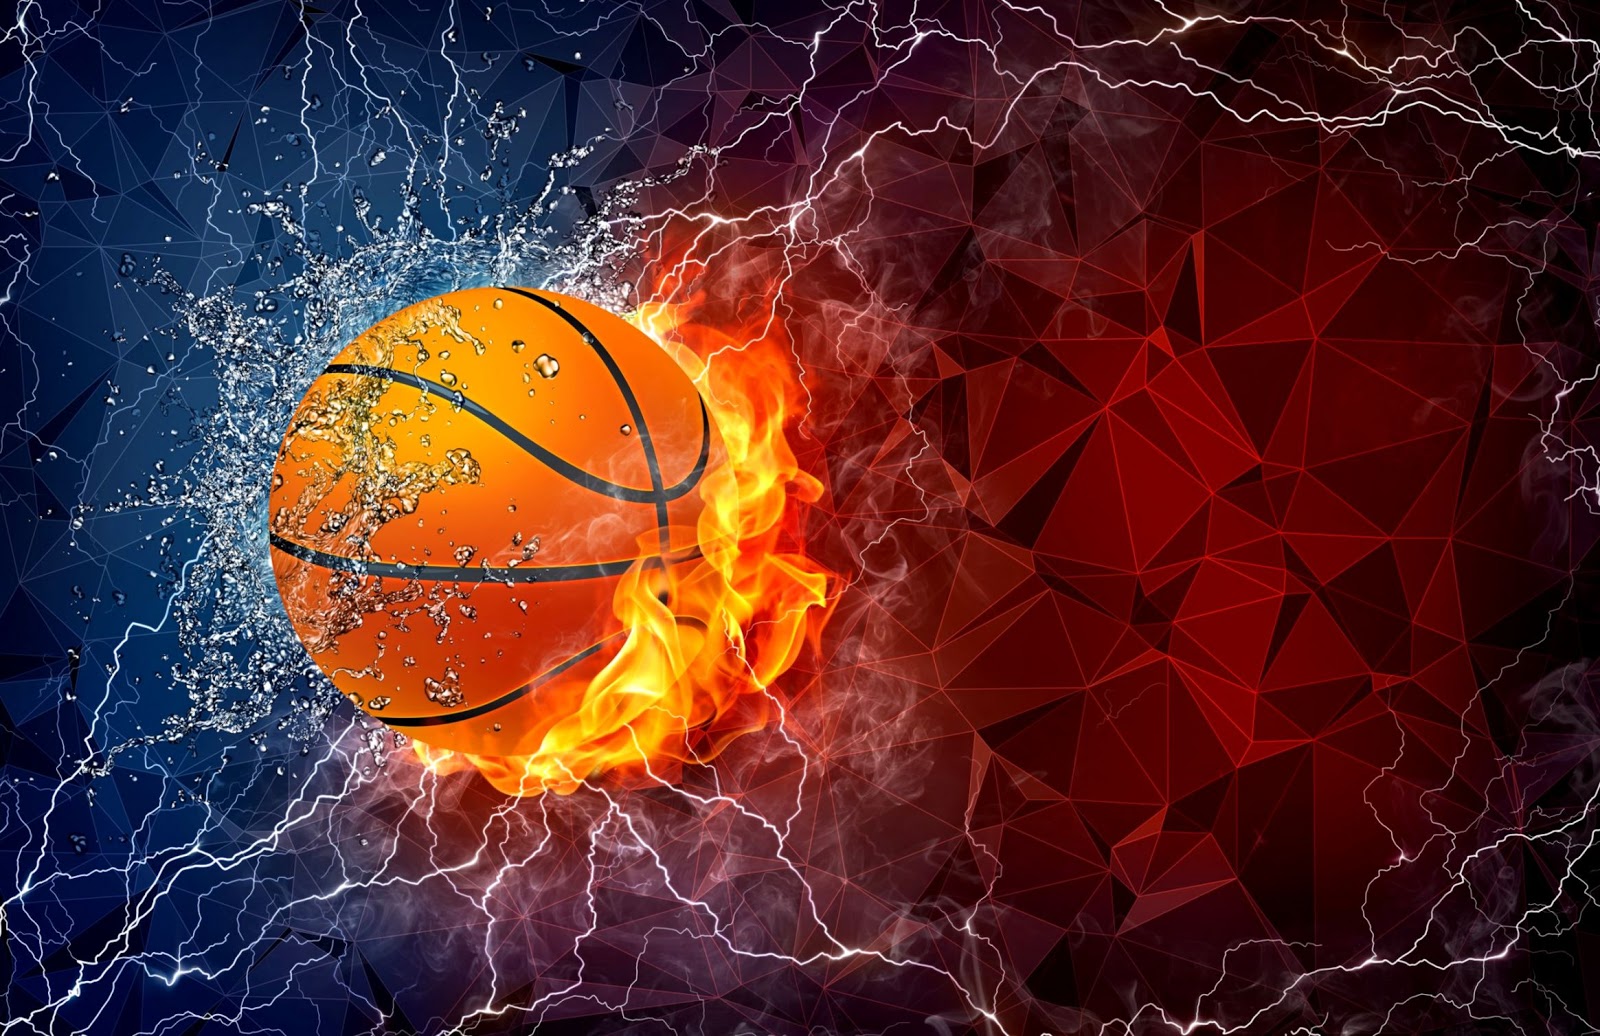 Cool Basketball Backgrounds - Cool Pictures Of Basketballs - HD Wallpaper 